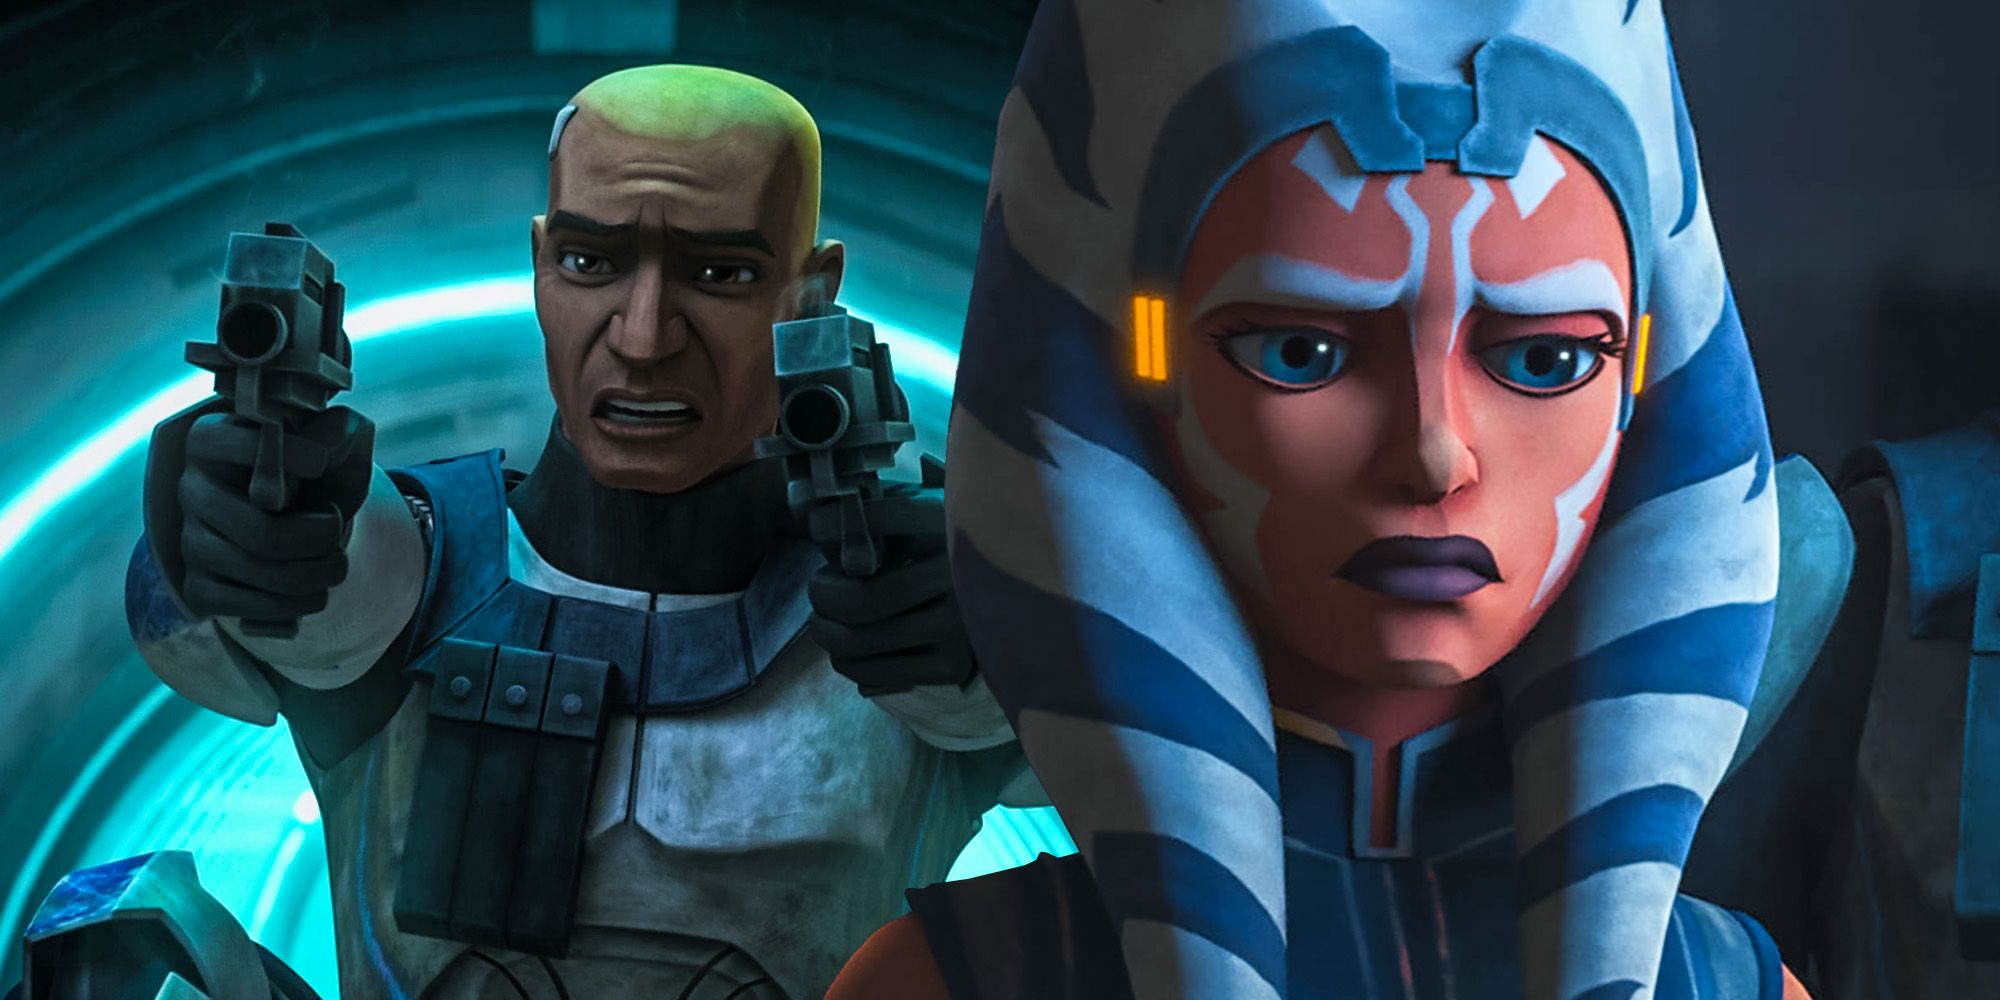 The Clone Wars Finale Retconned Rex’s Order 66 Story (¿Pero fue mejor?)